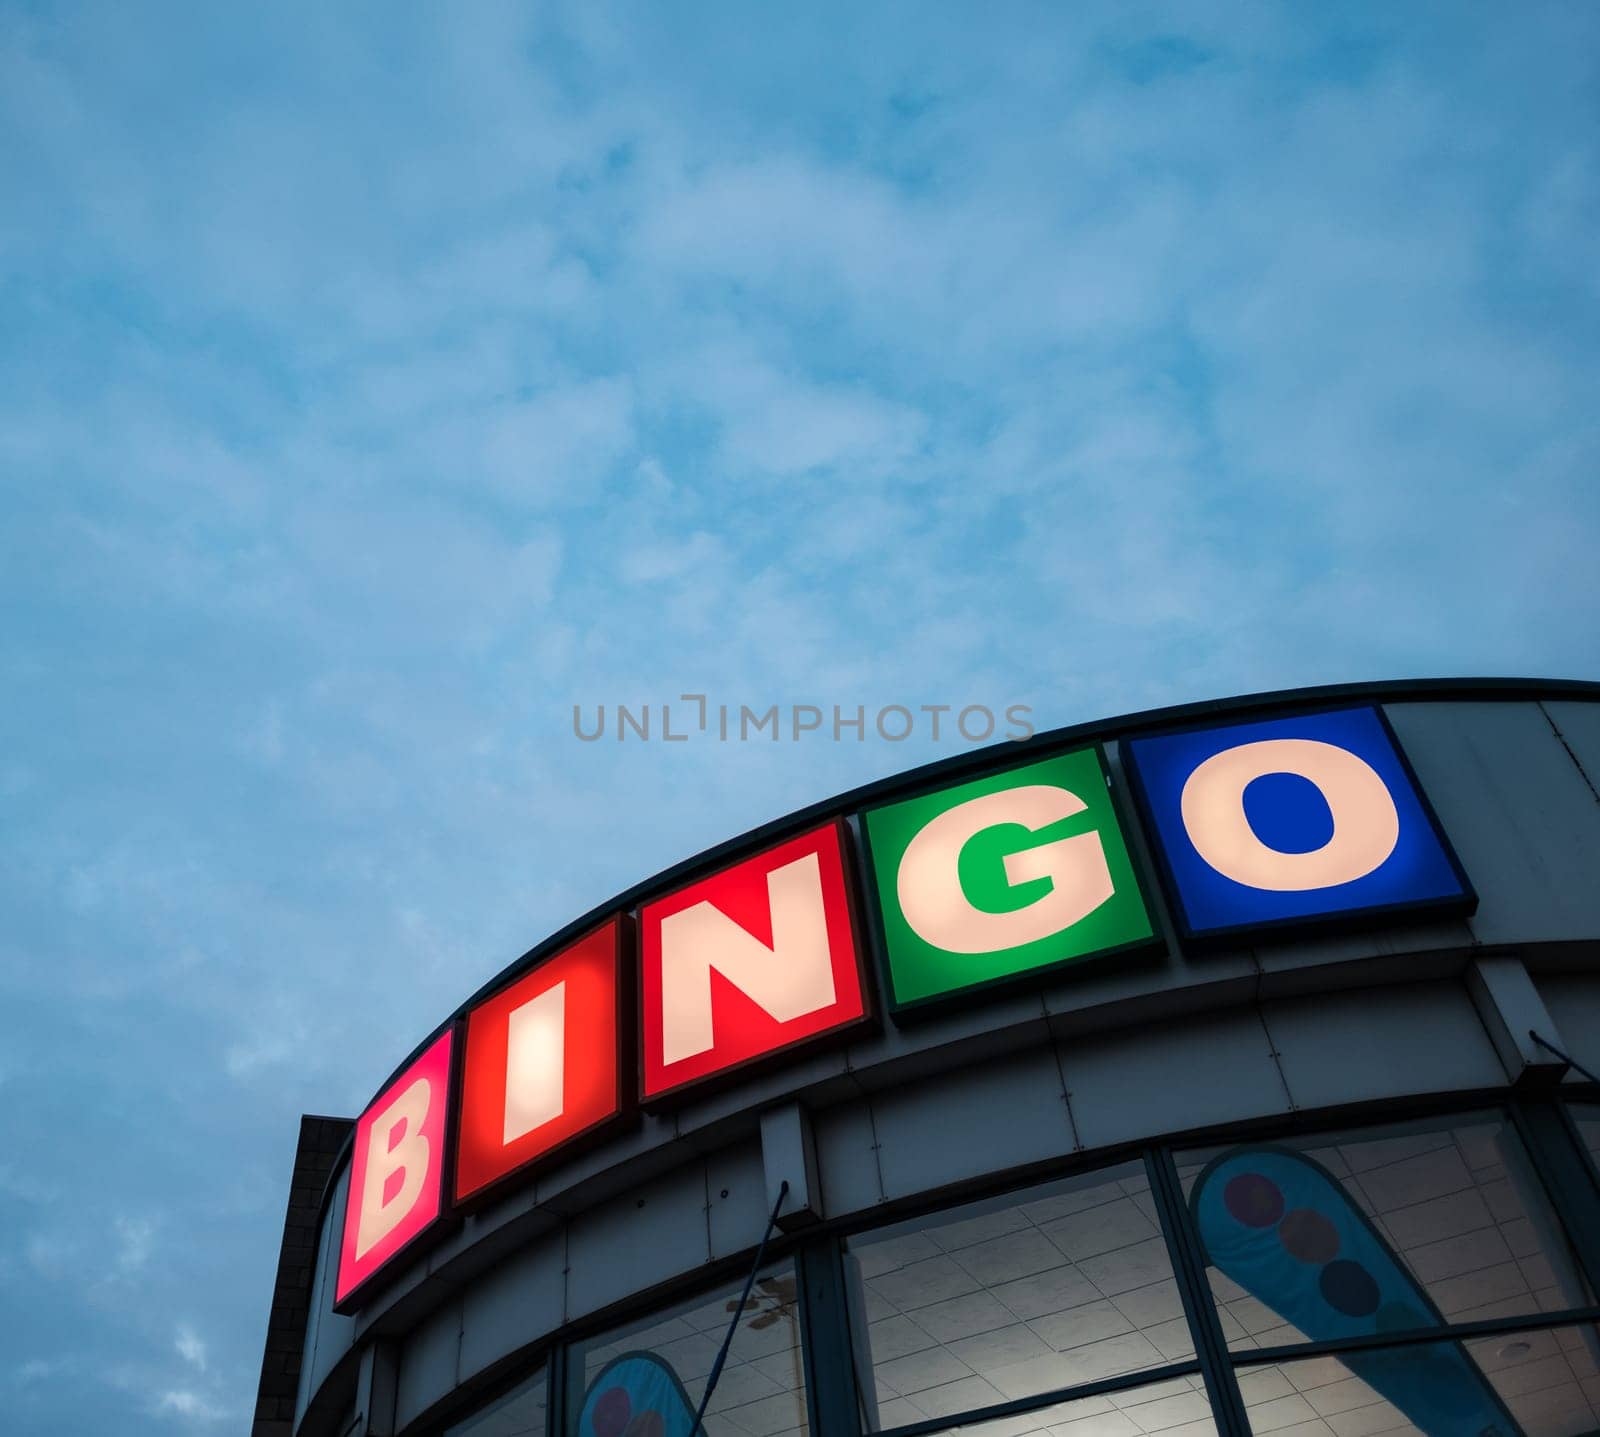 A Sign For A Bingo Hall Against A Cloudy Sky In A British Town, With Copy Space